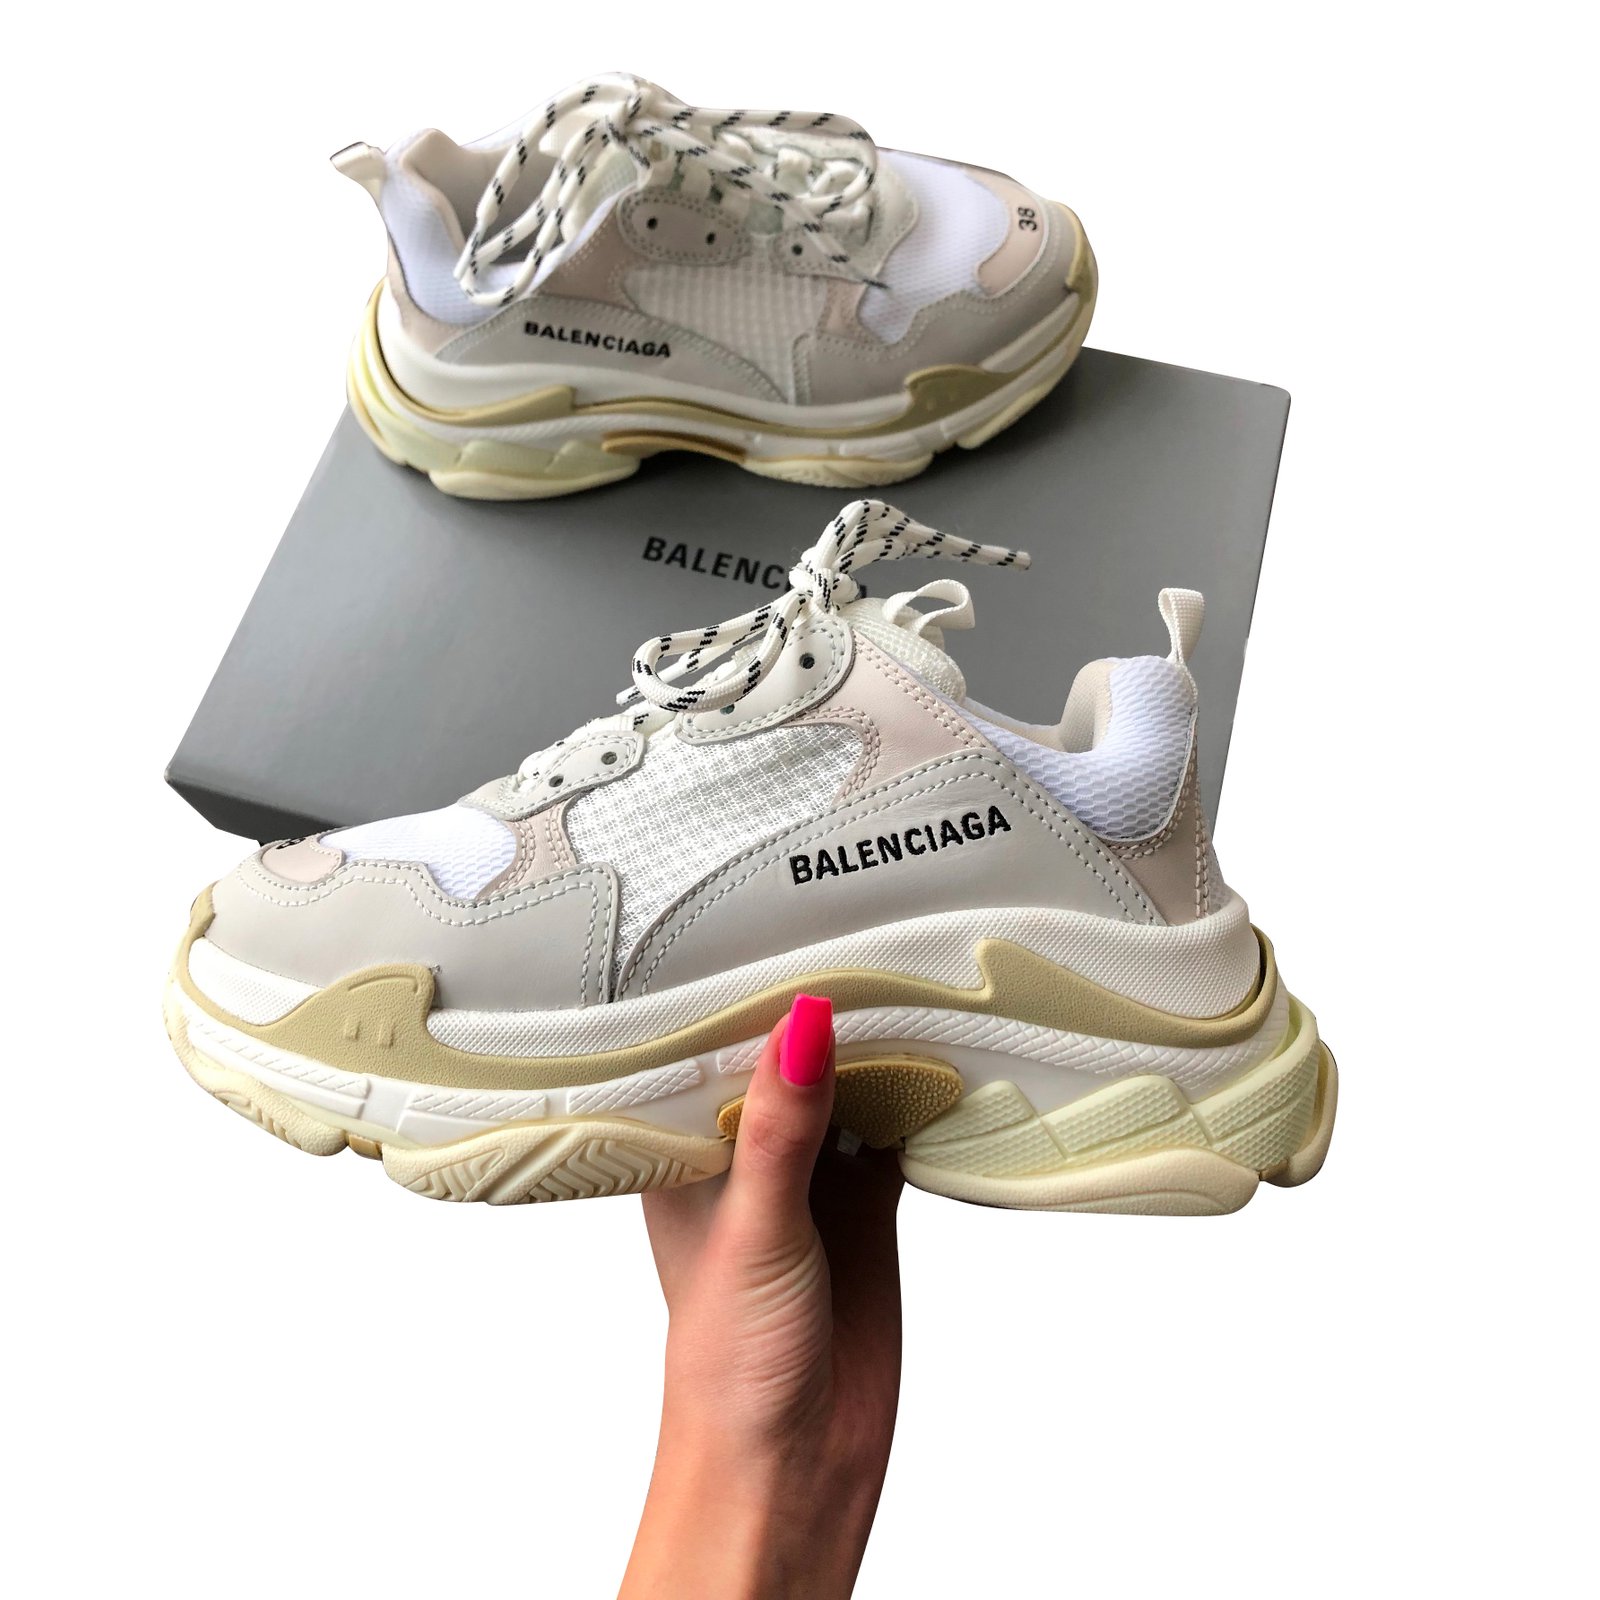 Used Selling Balenciaga Triple S for sale in Burnaby letgo